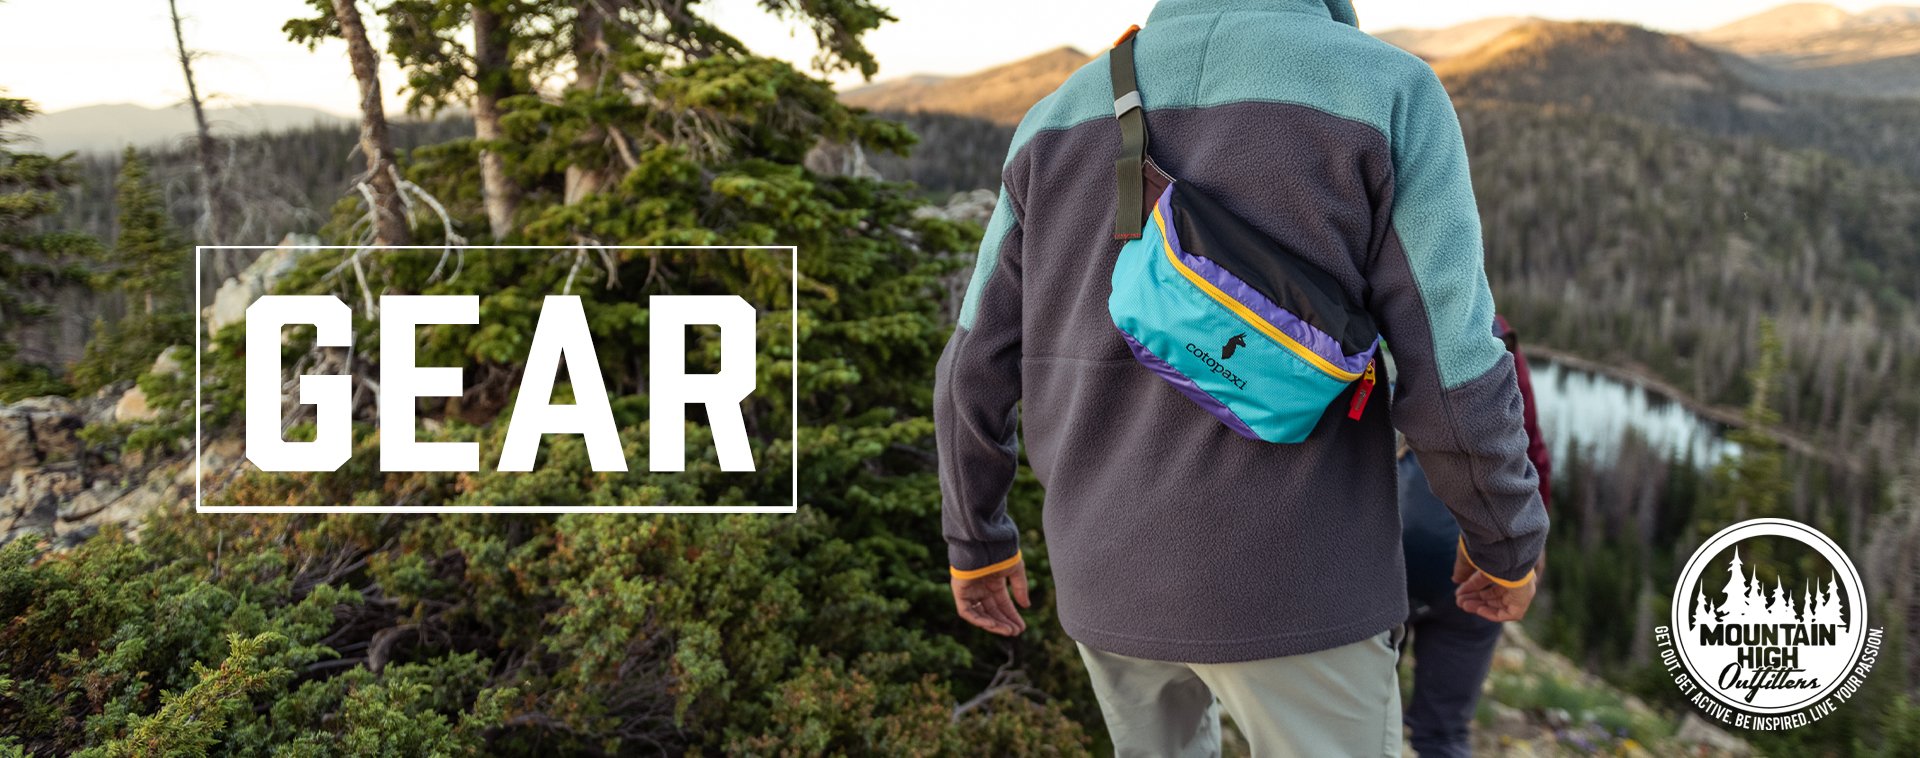 Prana – Mountain High Outfitters